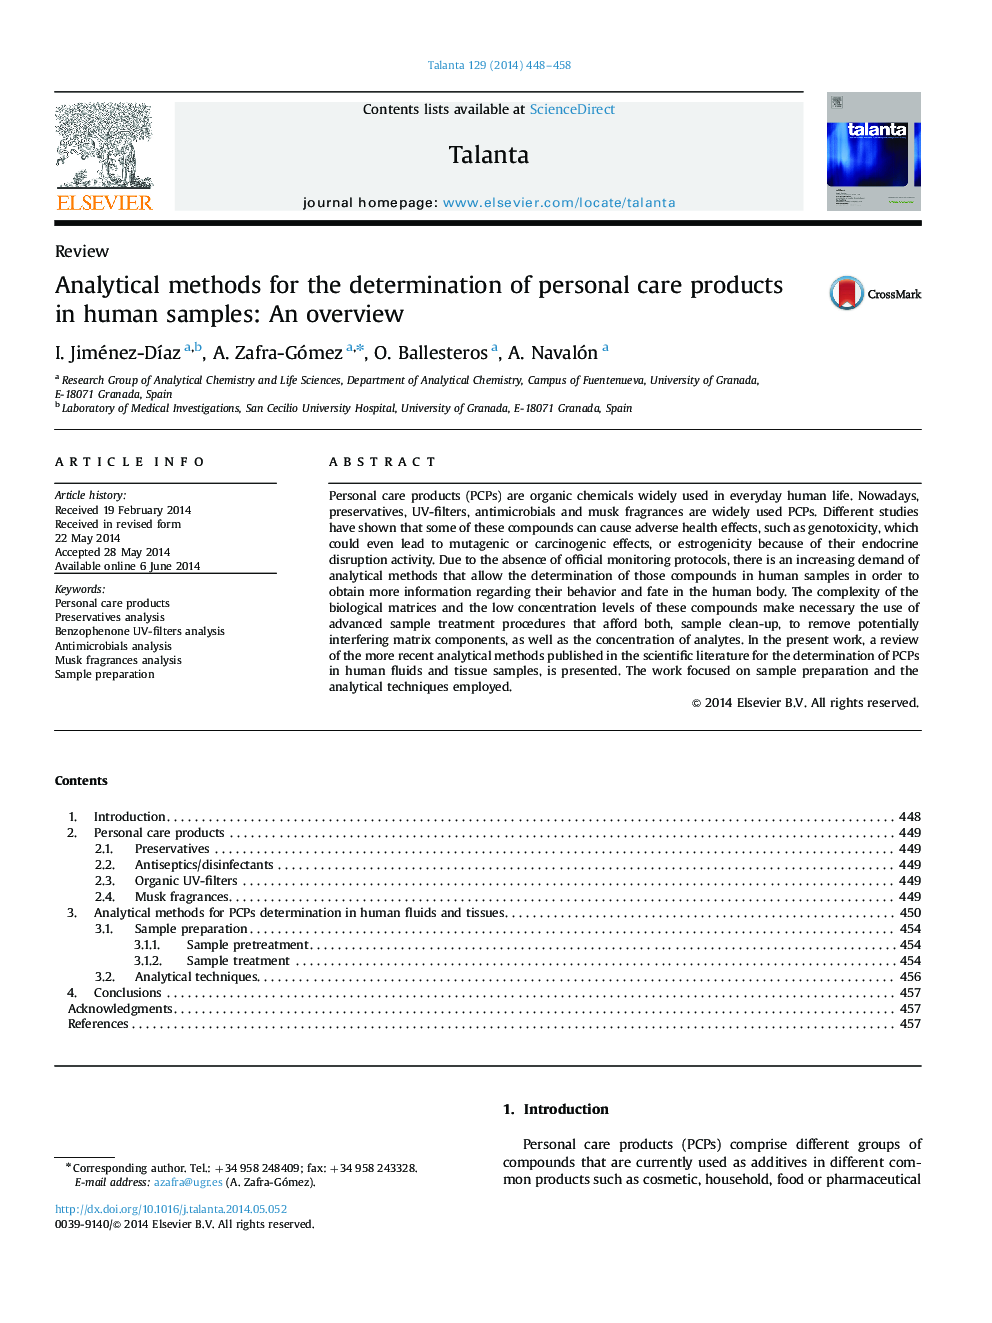 Analytical methods for the determination of personal care products in human samples: An overview